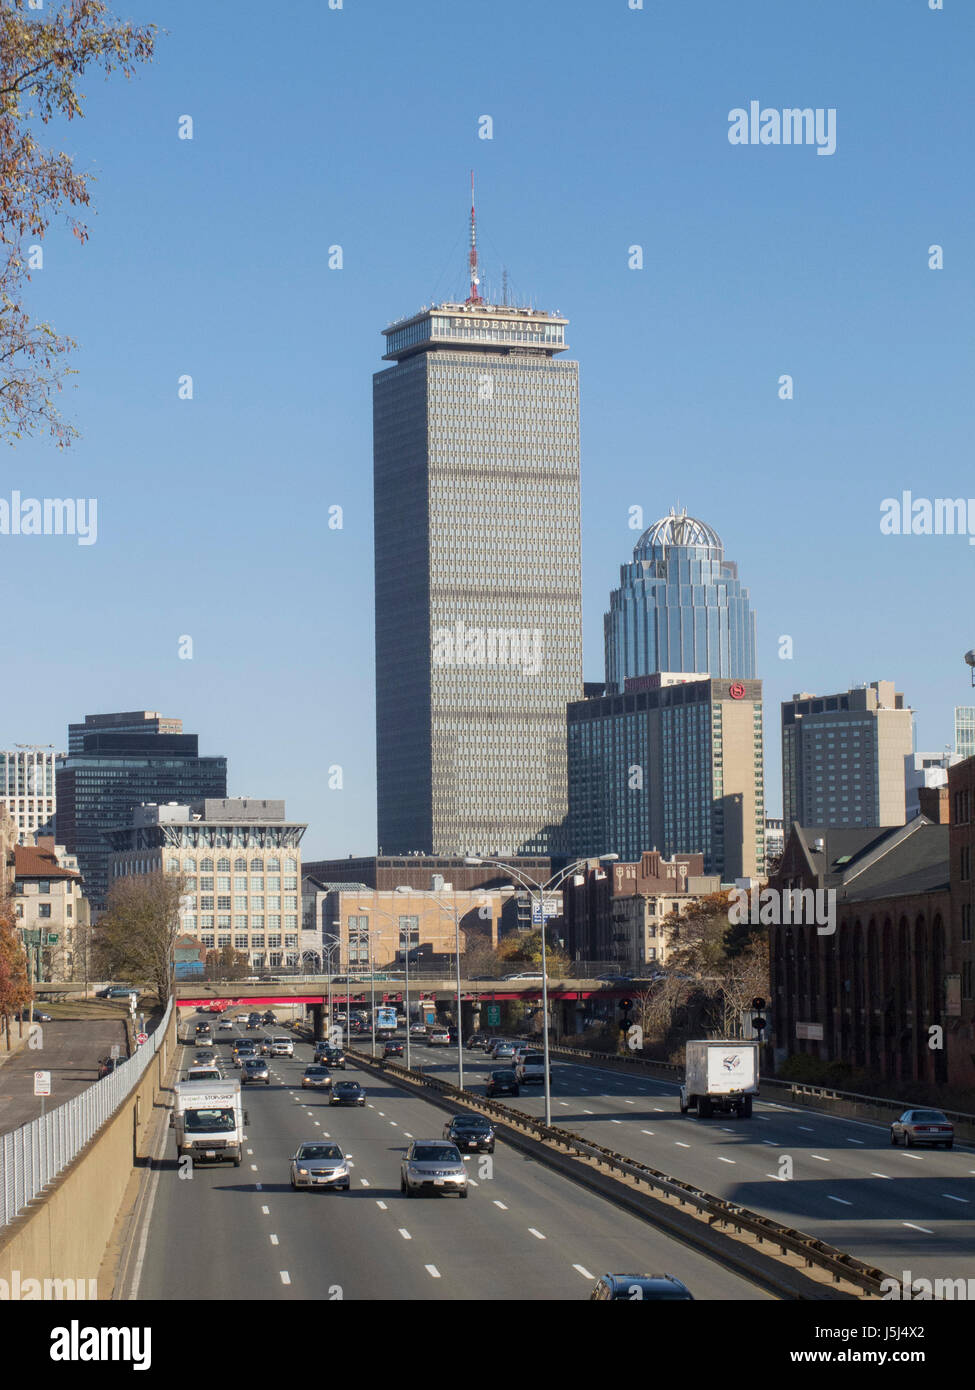 Looking east along the Massachusetts Turnpike towards Boston's Back Bay district. Stock Photo